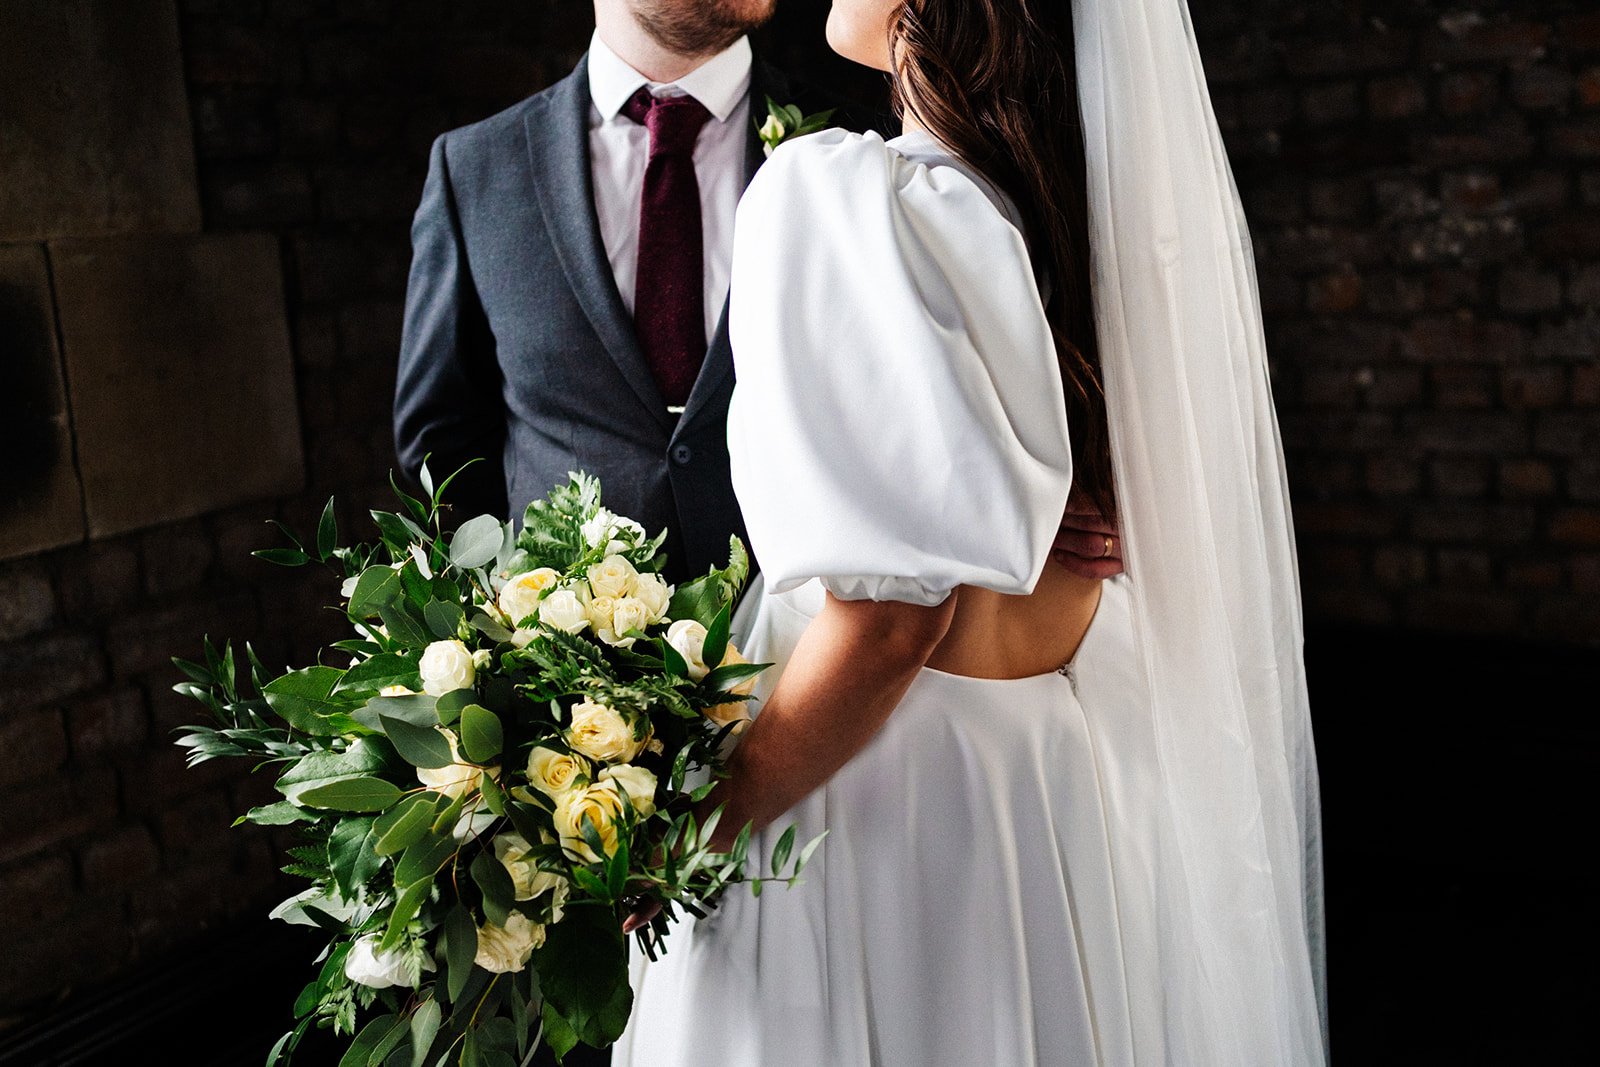 a close shot of the bride and groom standing close to each other, the detail shows her dress sleeves, his suit and her flowers. wedding at dalton old pump house 